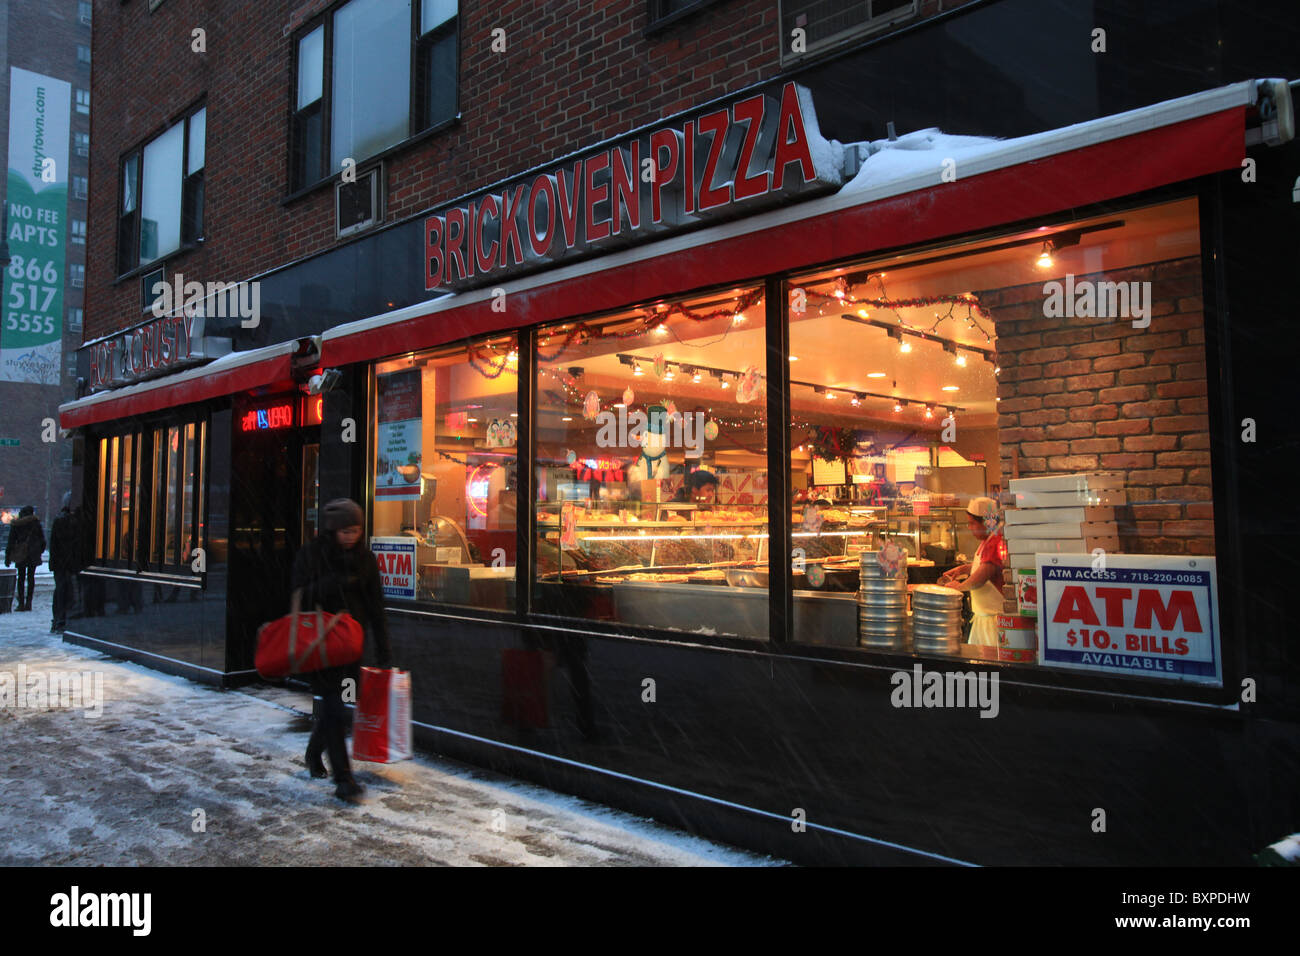 Brick oven pizza store on Third avenue, New York city, in the great blizzard that came in Christmas 2010 Stock Photo